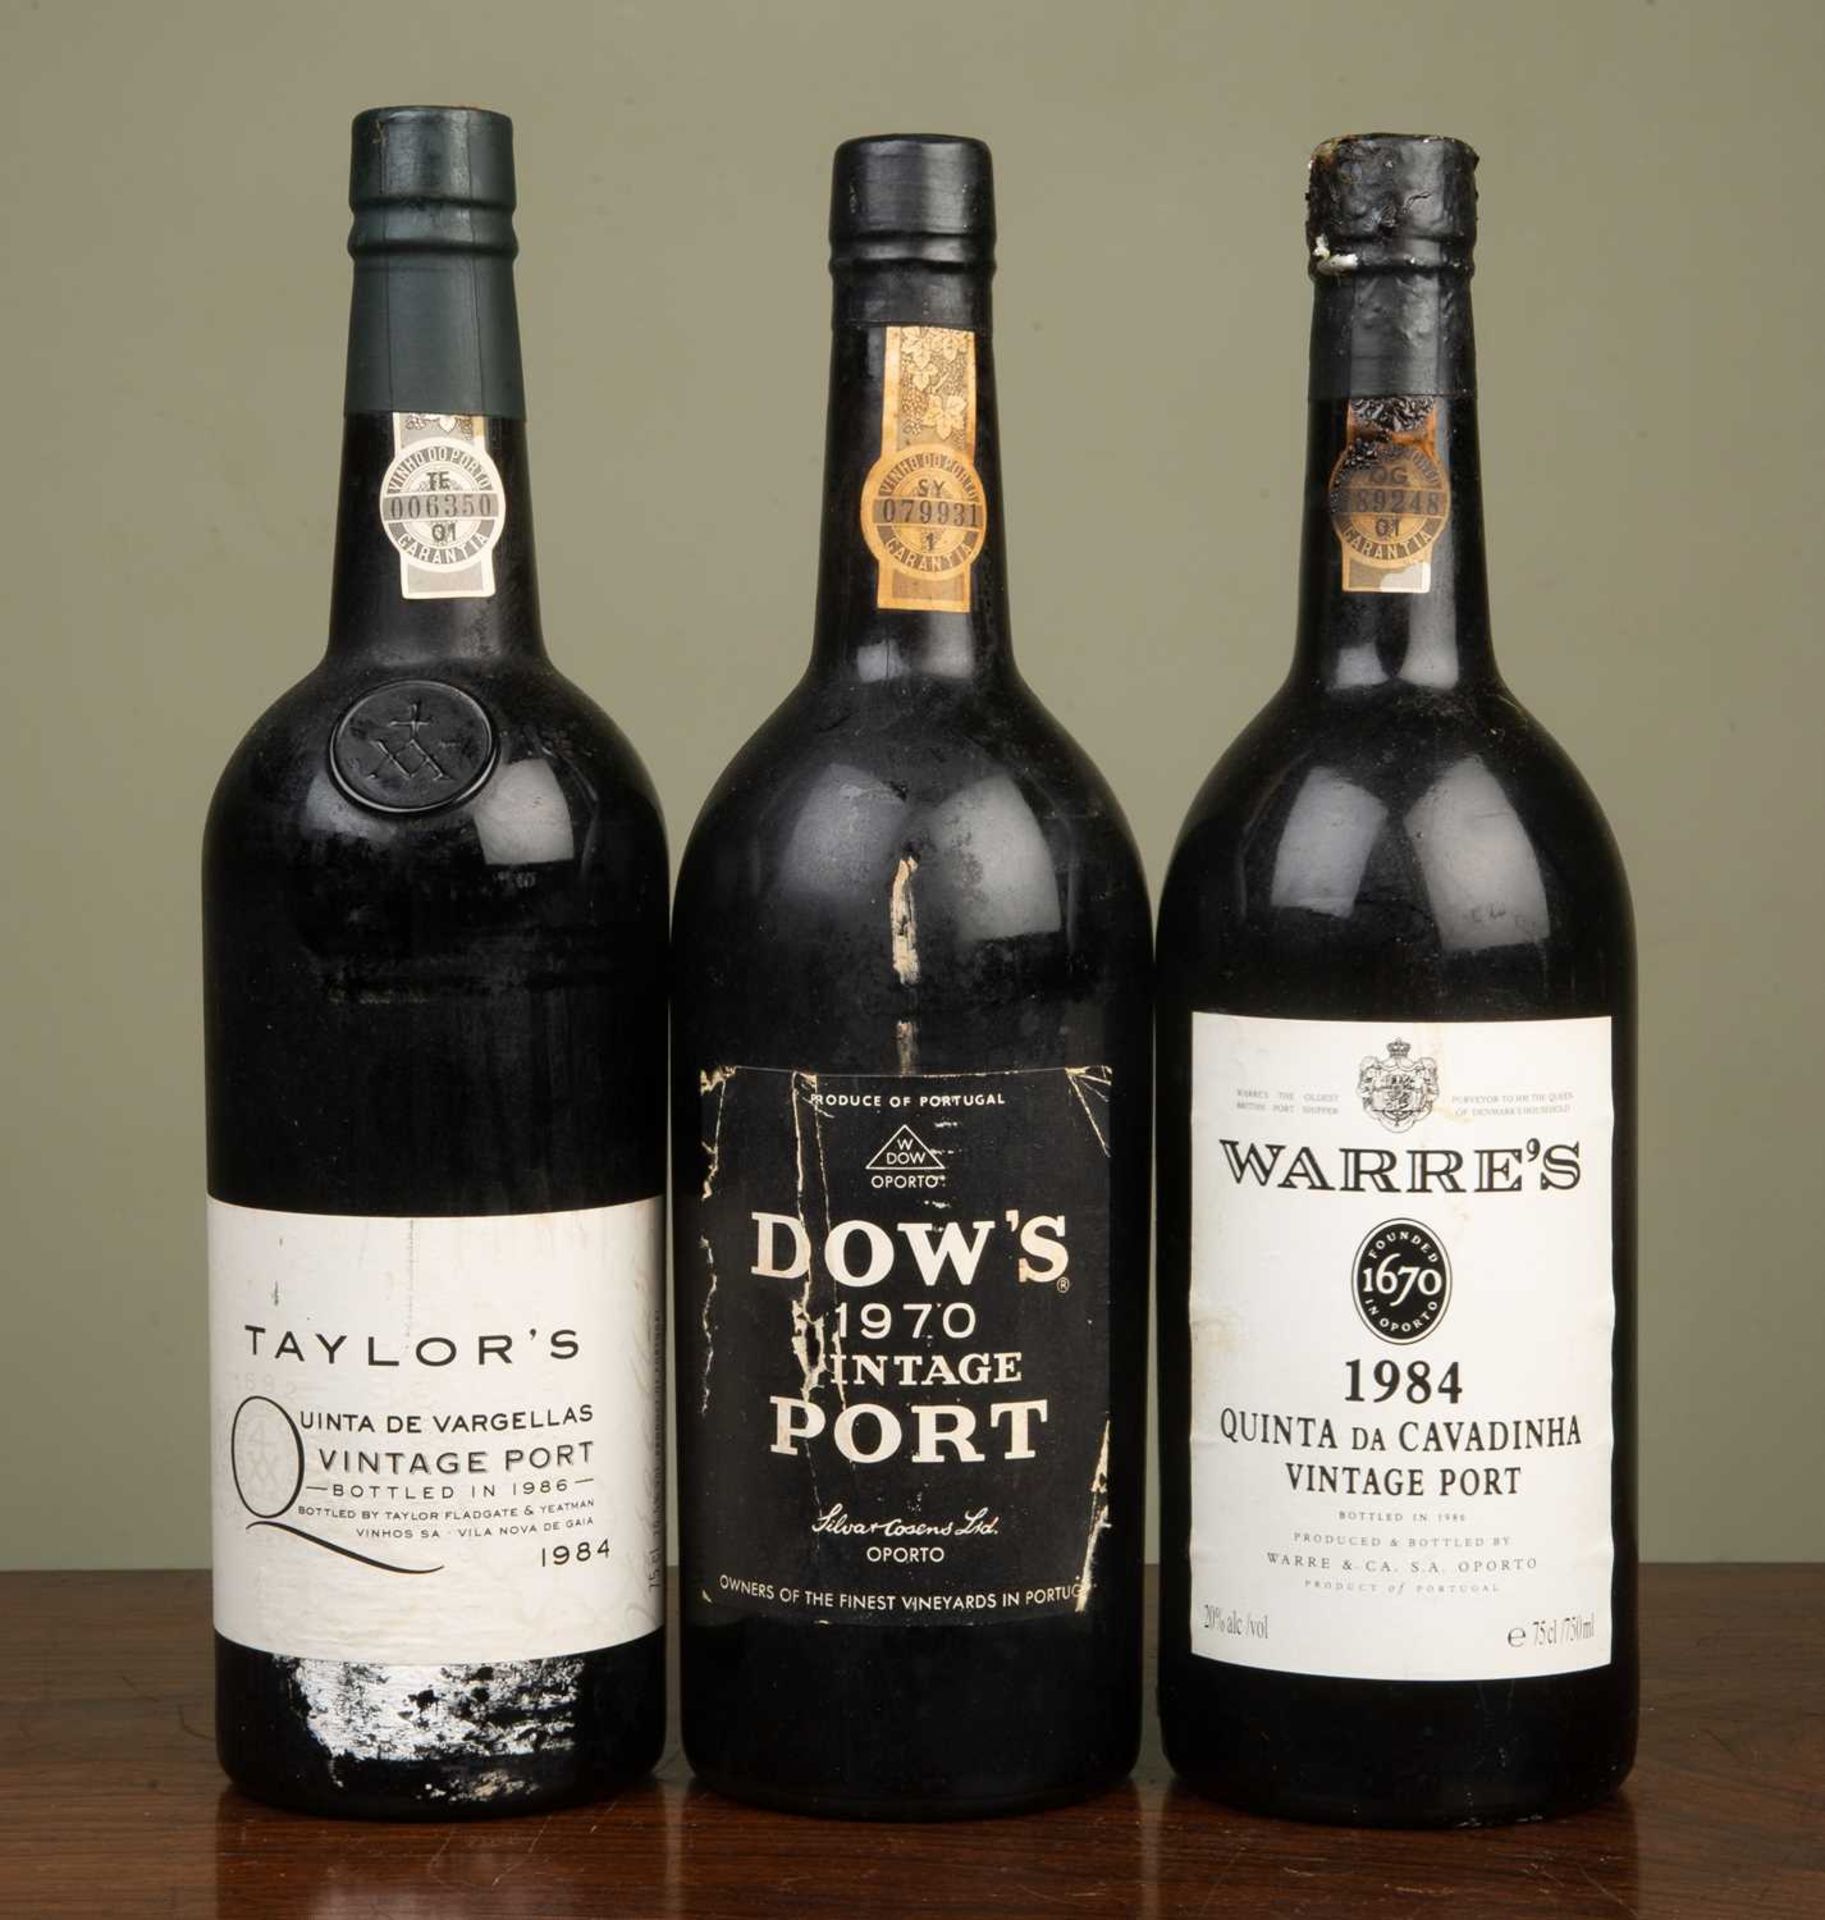 Vintage Port, a bottle of Warre's 1984, a bottle of Taylor's 1984 and a bottle of Dow's 1970 (3)